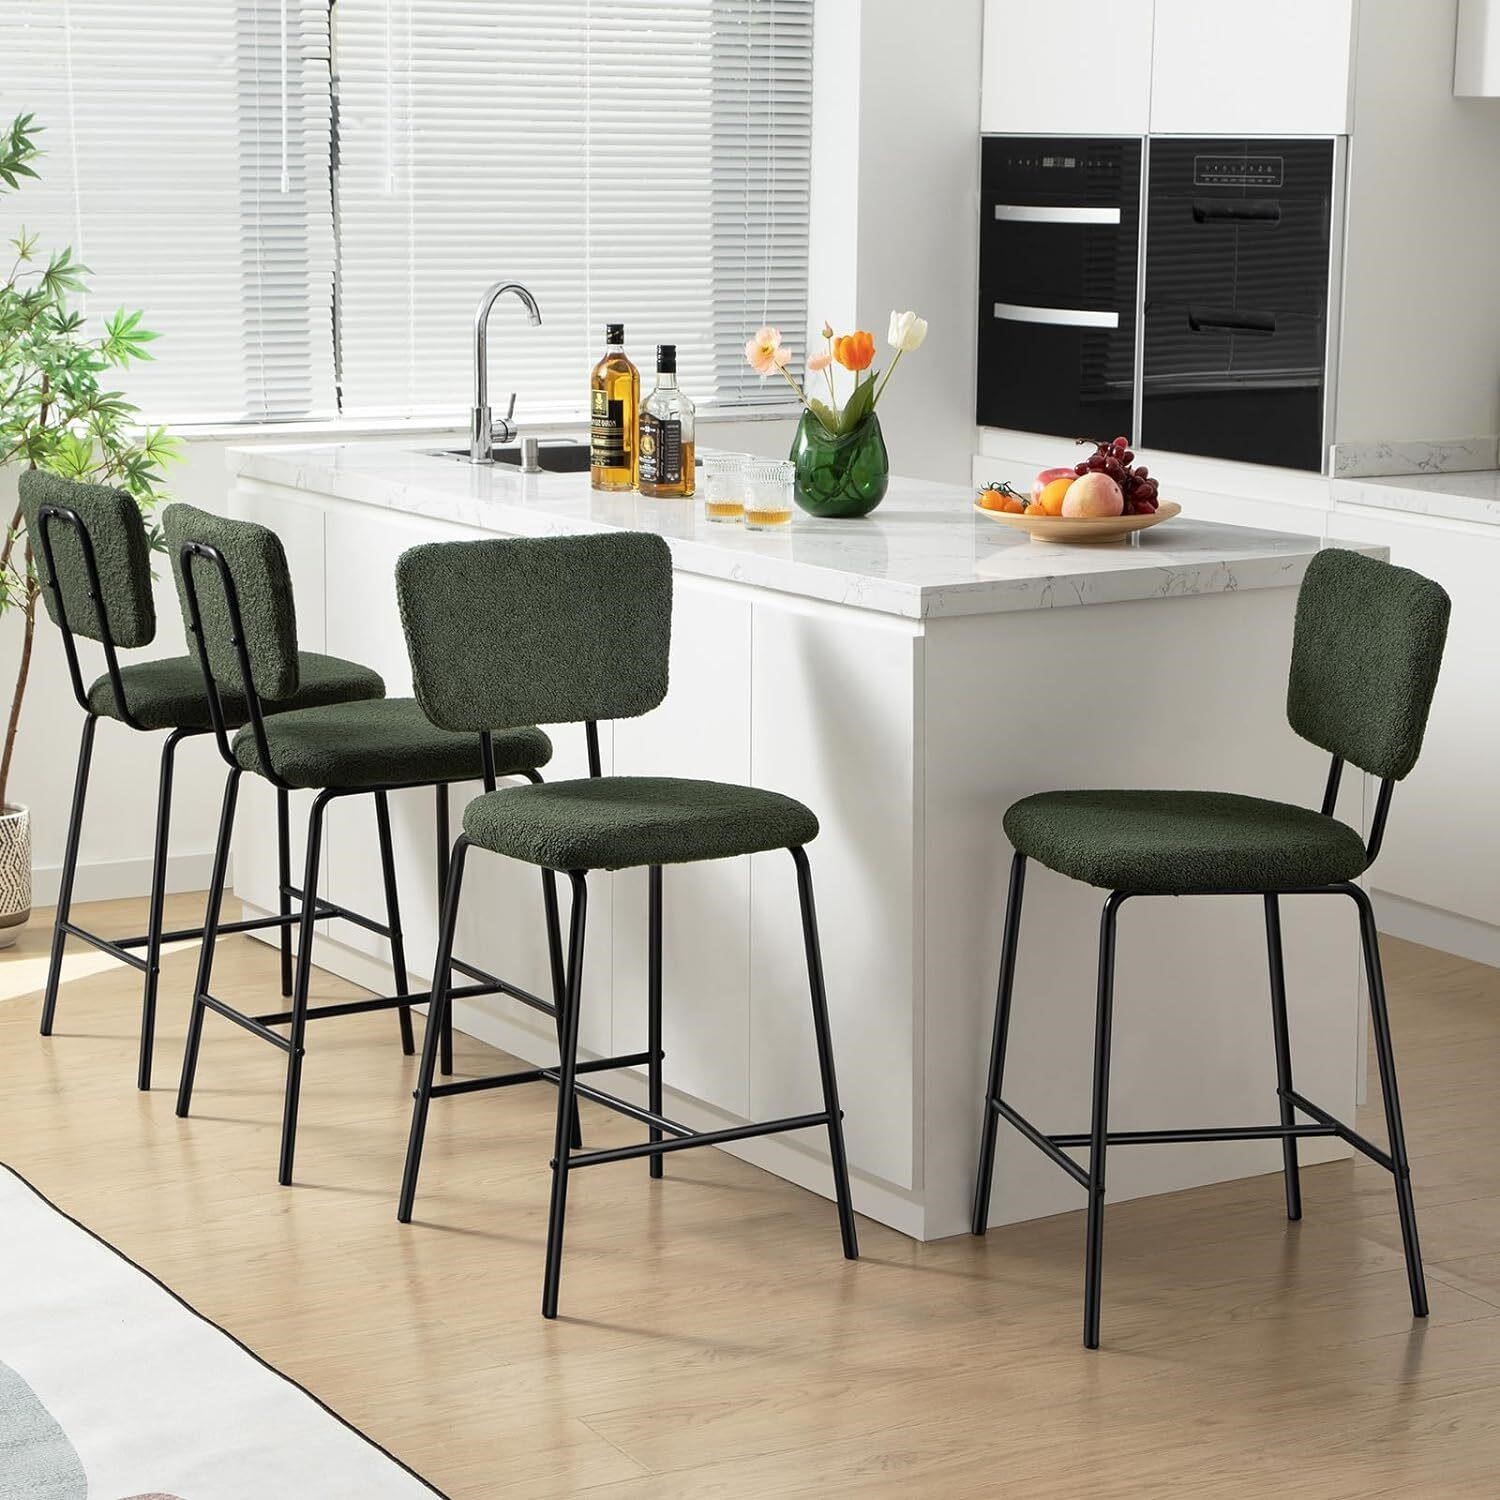 Counter Height Barstools Set of 4 - Green